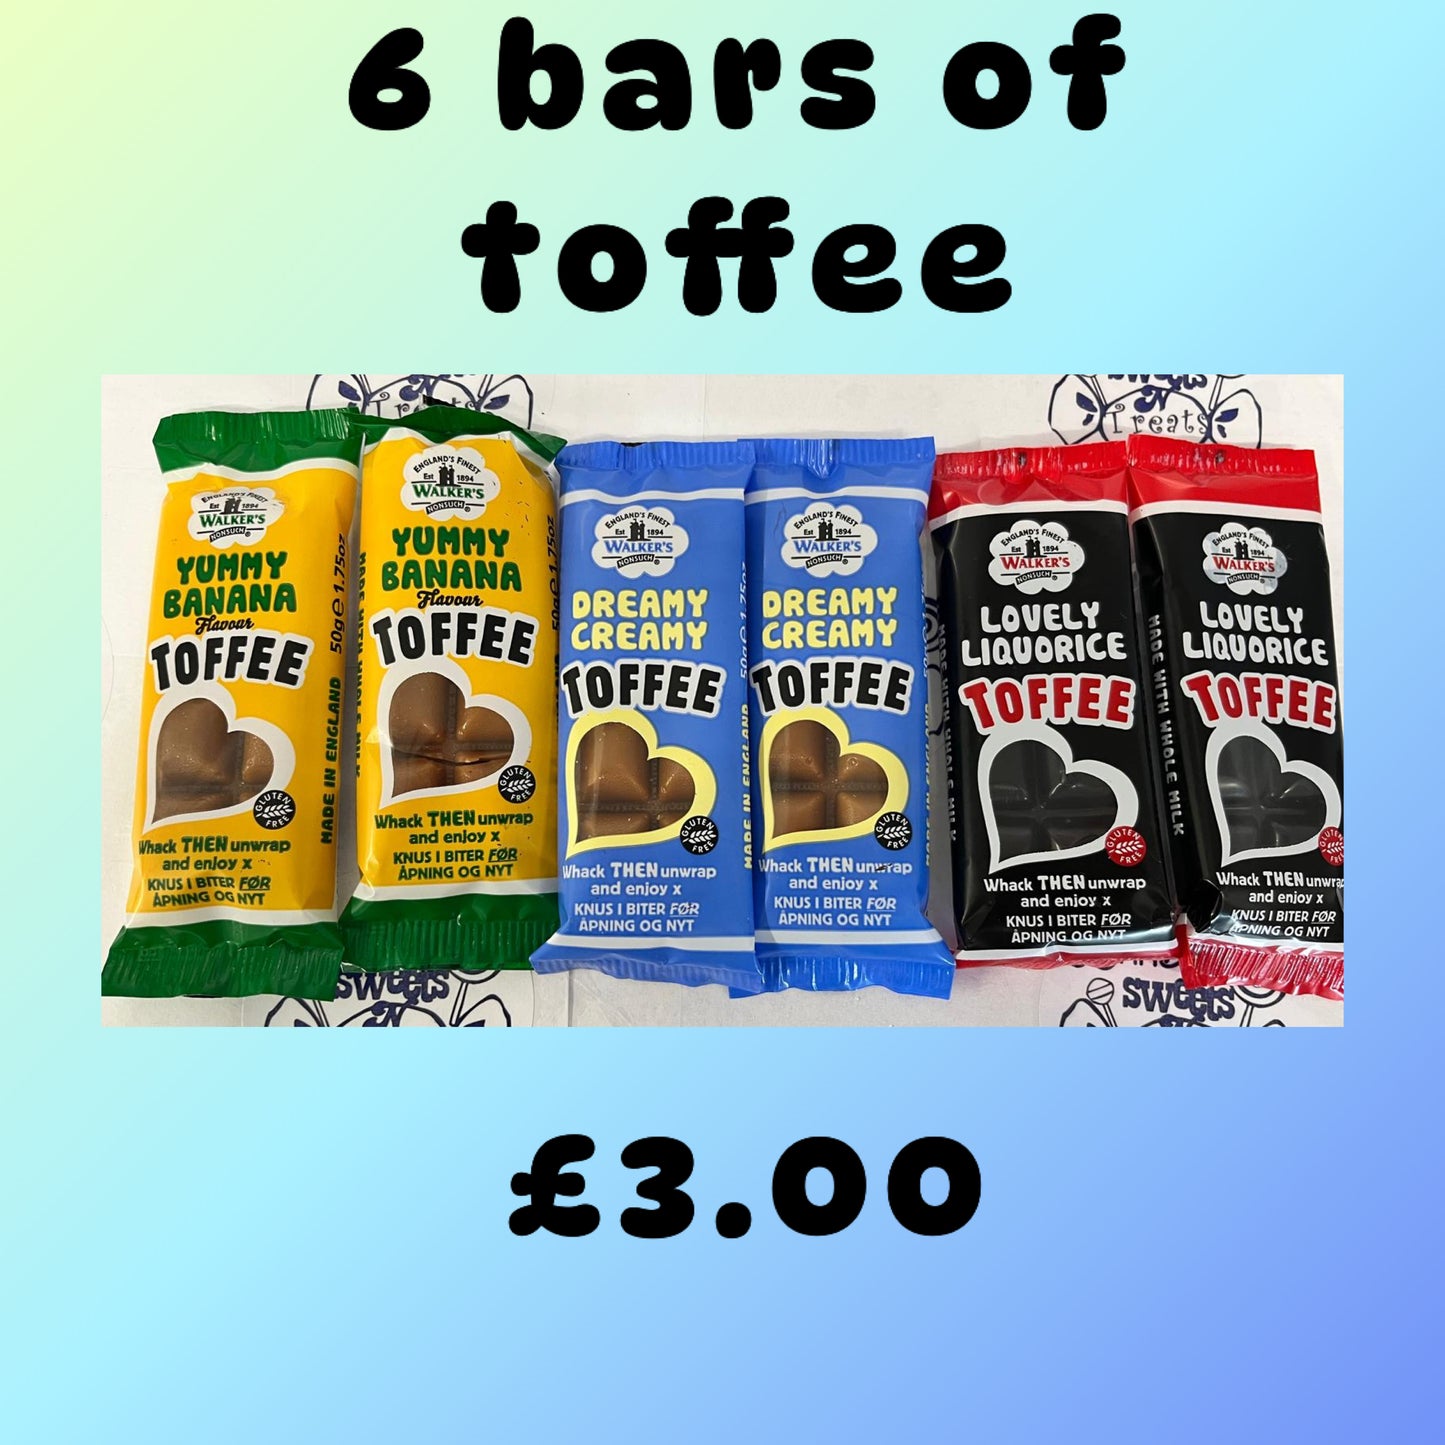 Toffee bars